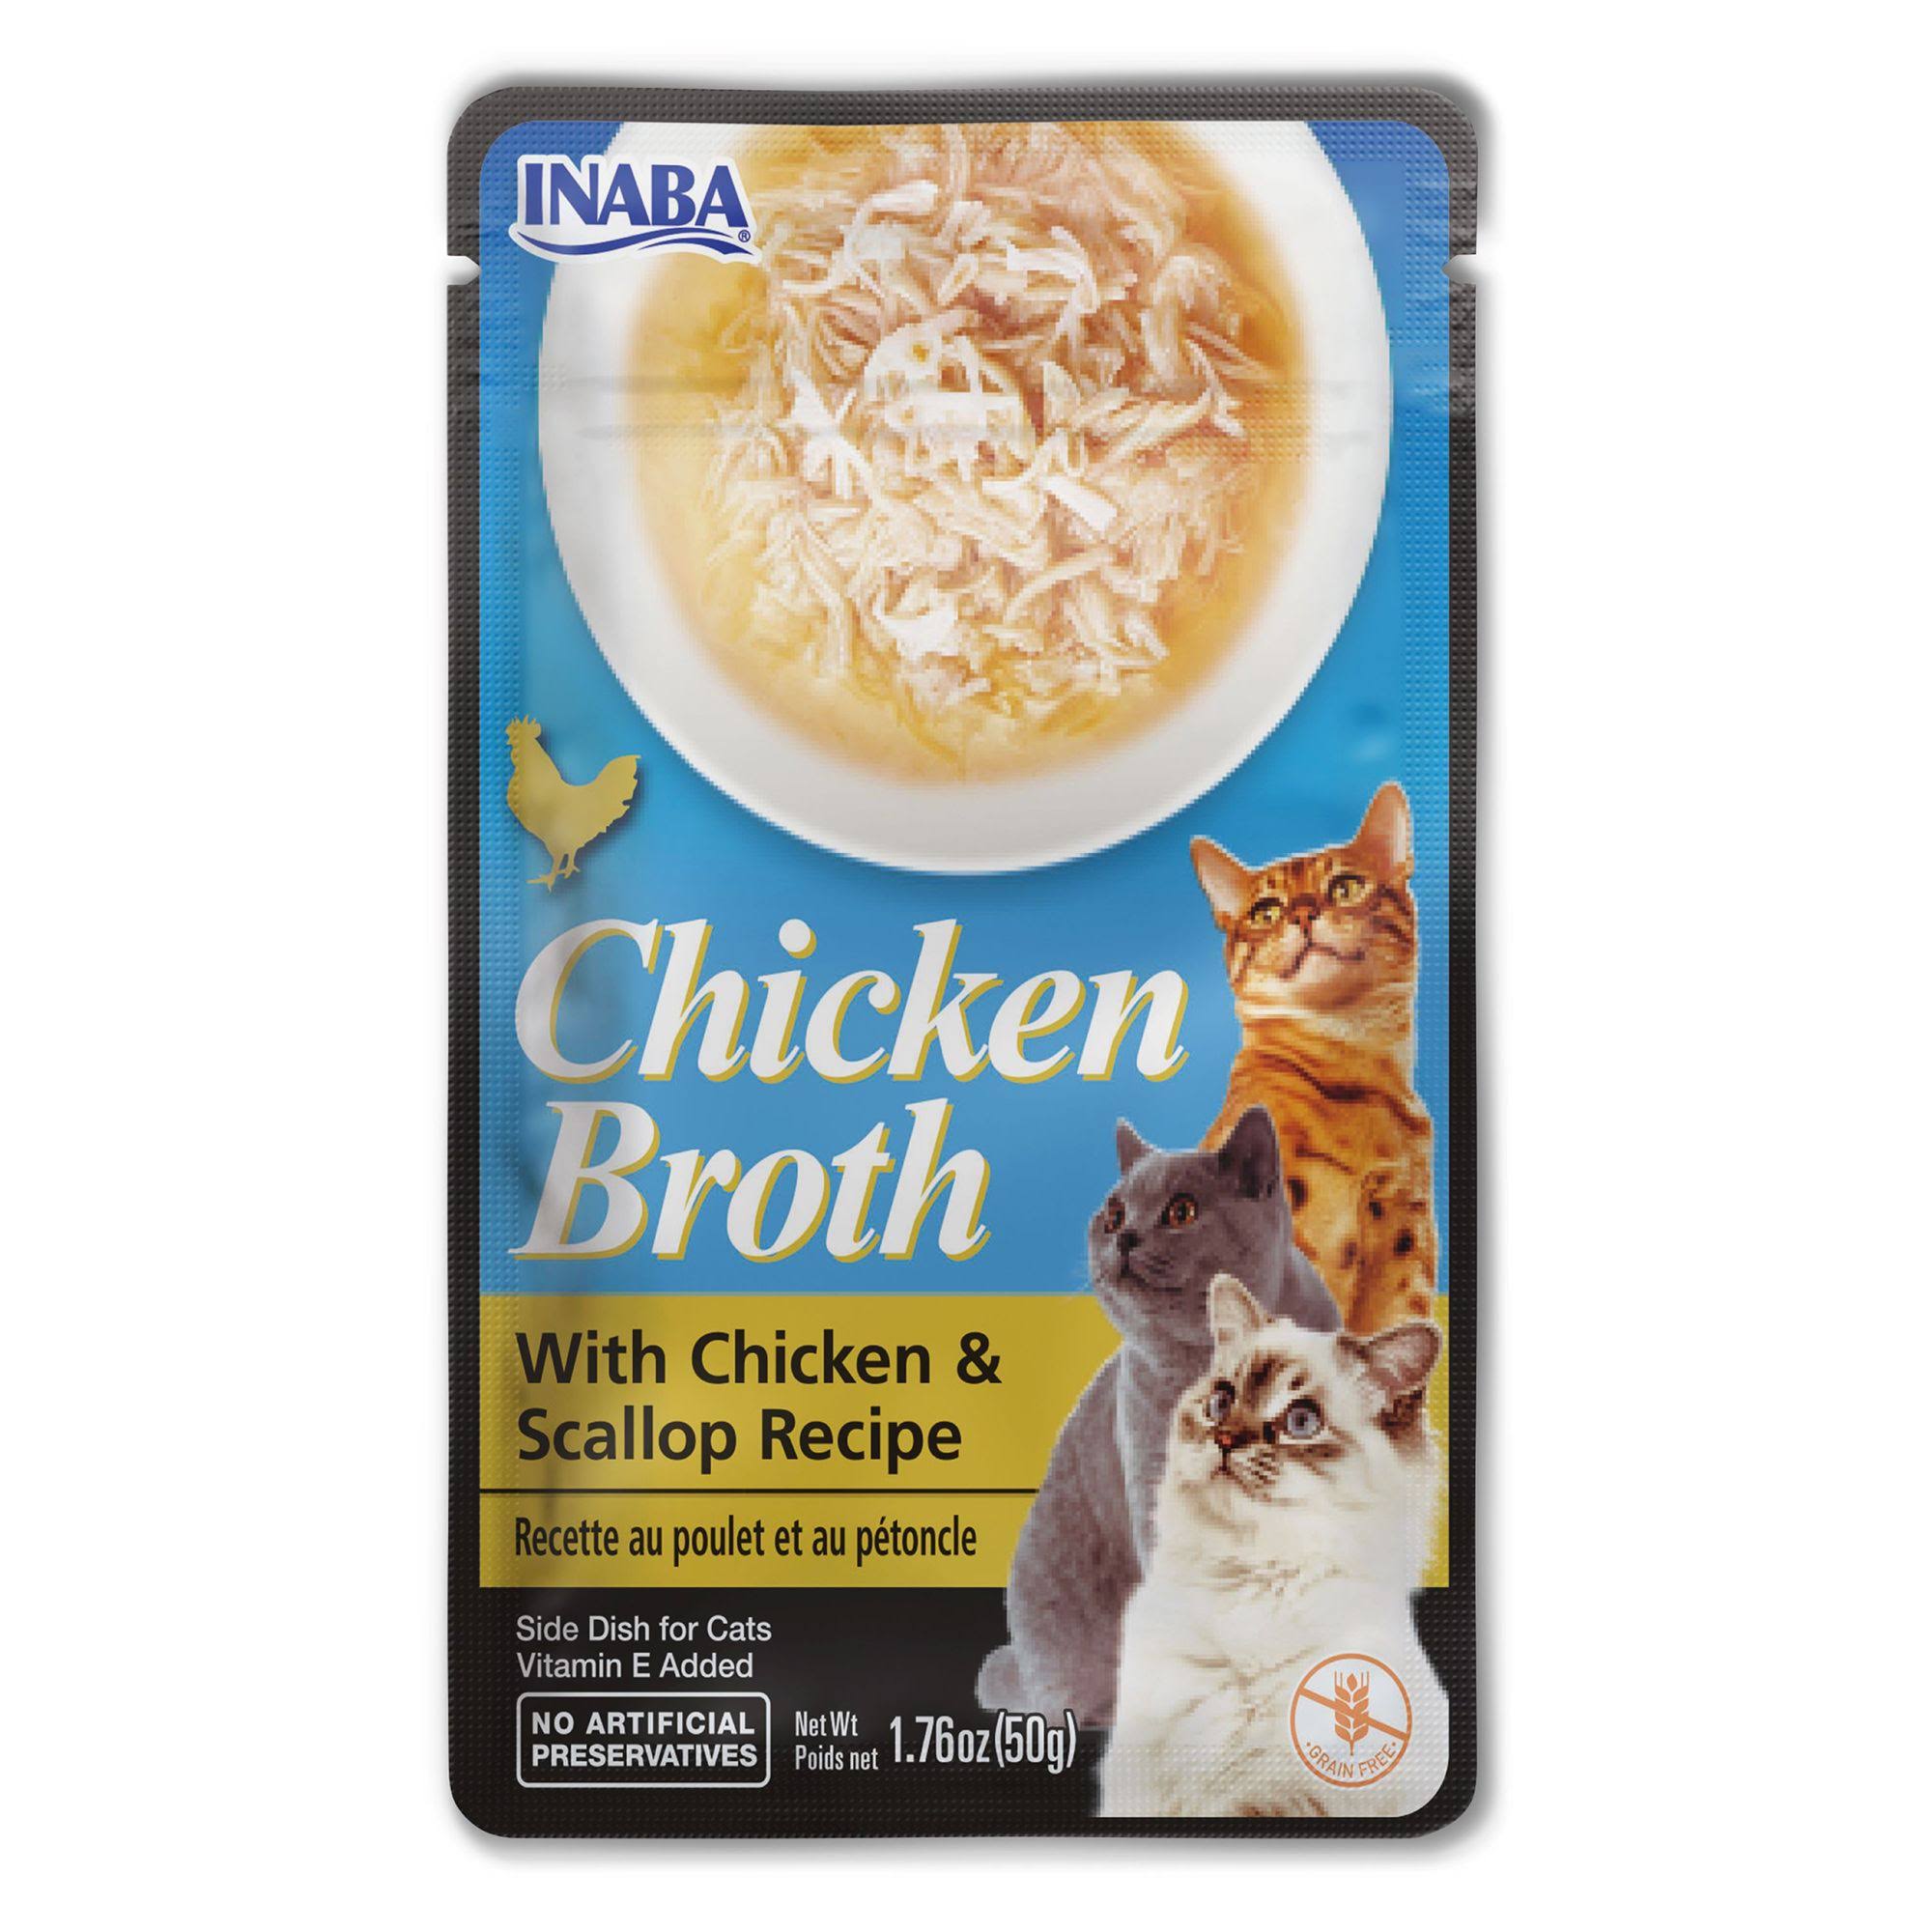 Inaba Side Dish for Cats, with Chiken & Scallop Recipe, Chicken Broth - 1.76 oz